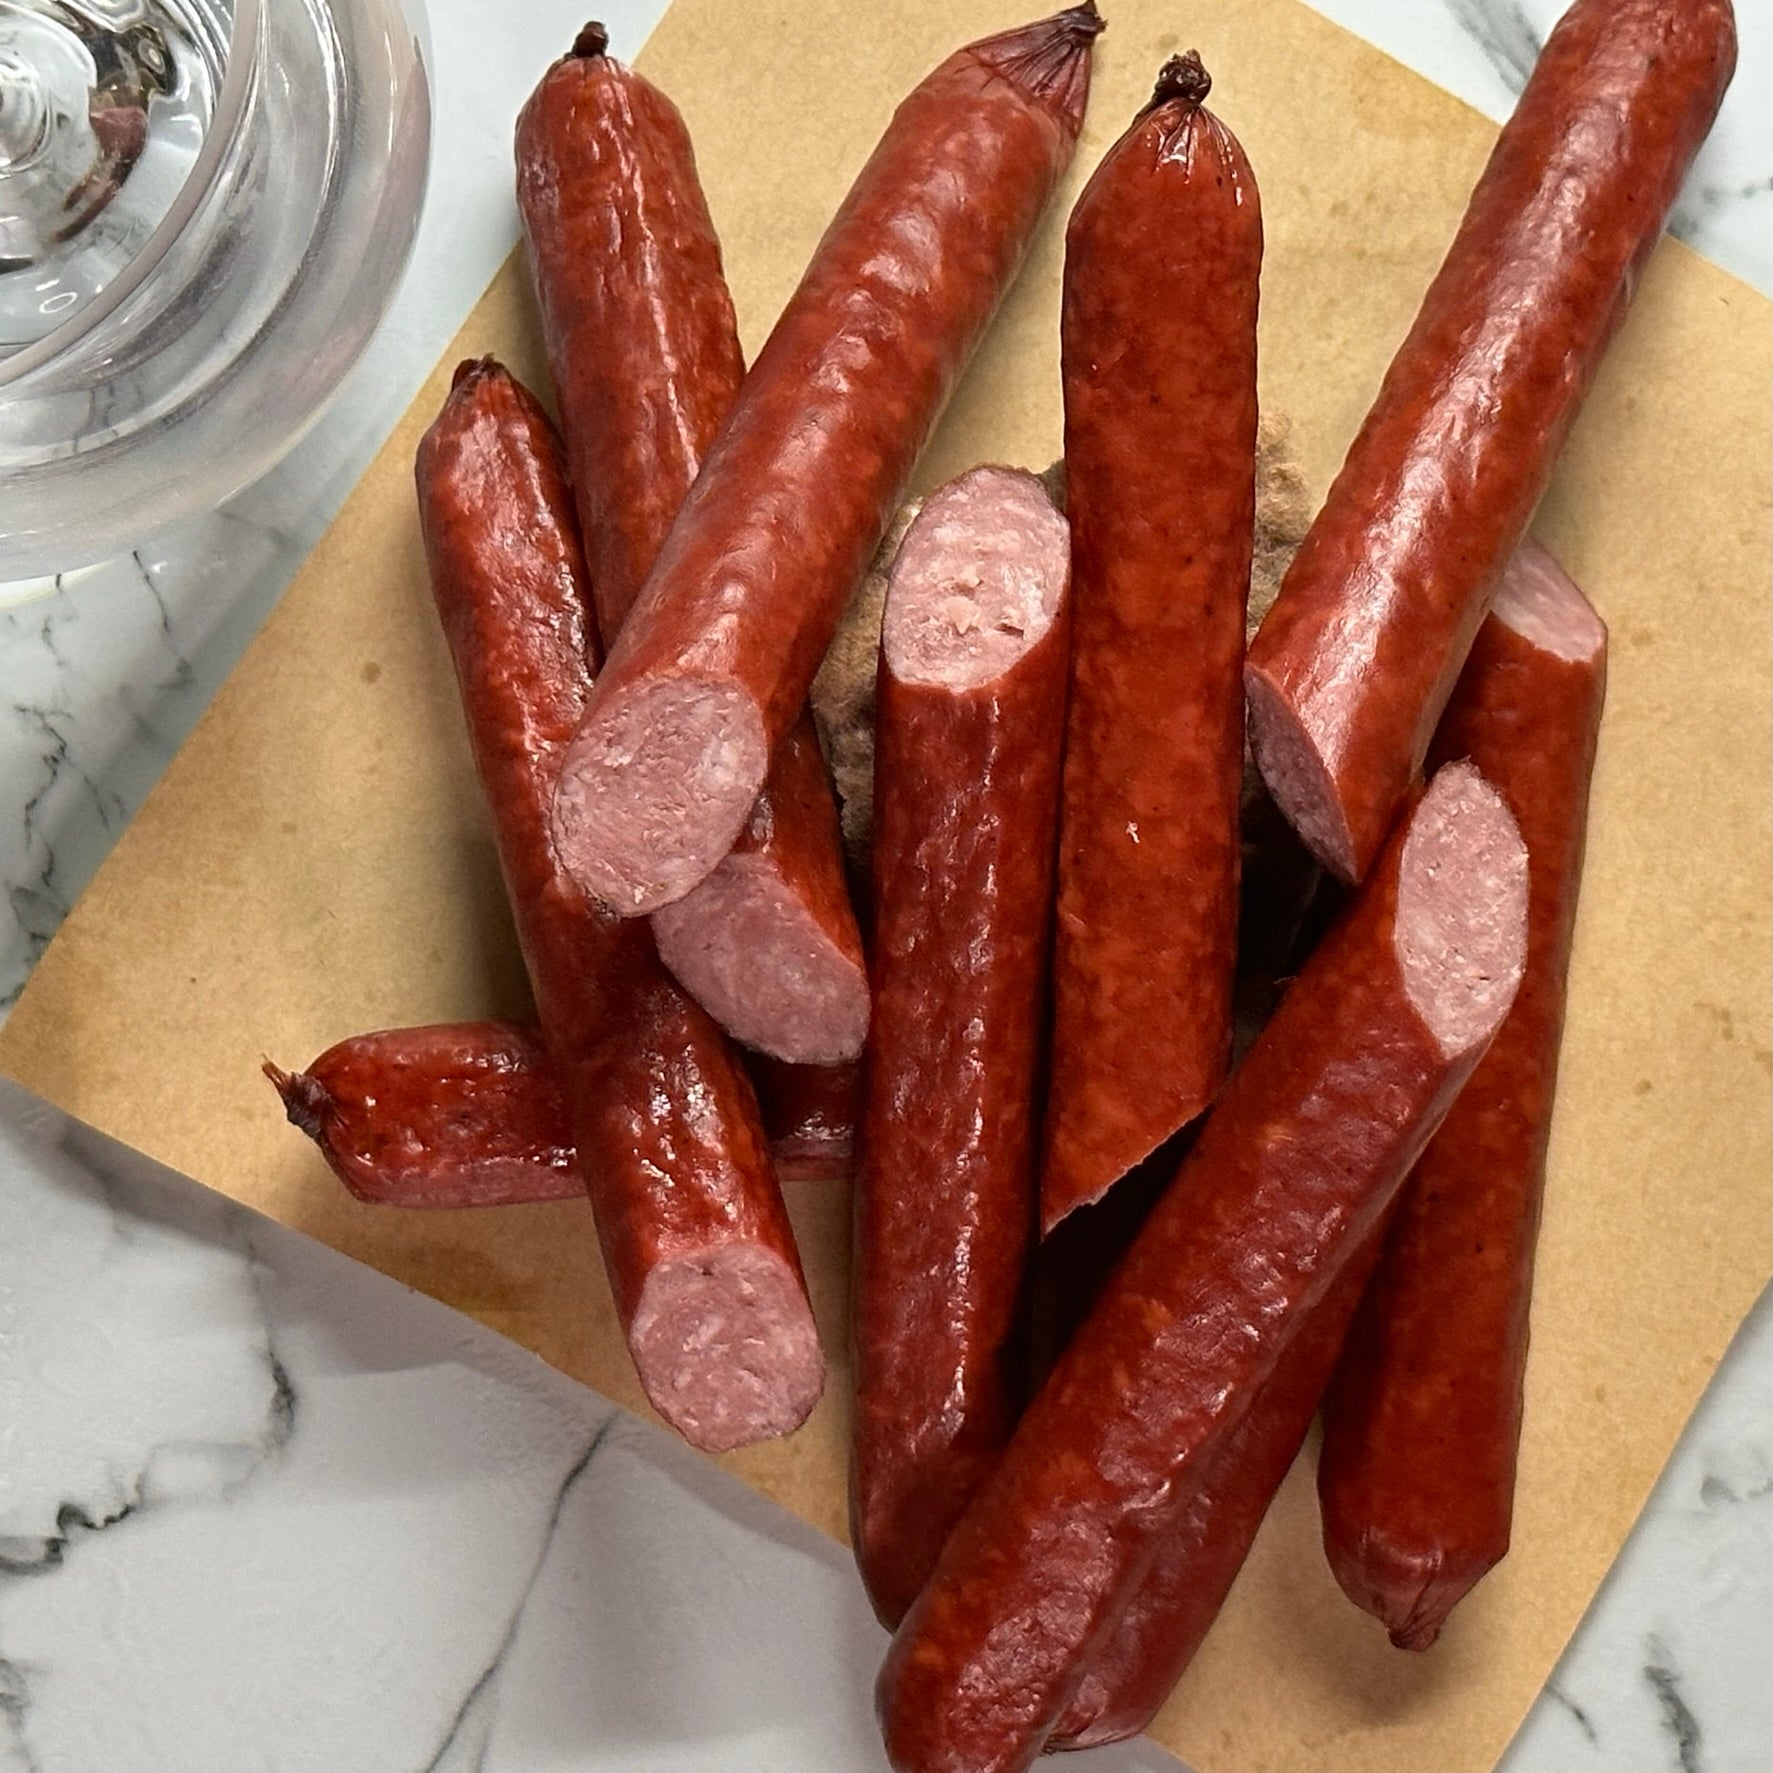 CUT PIECES OF GIN INFUSED SNACK STICKS